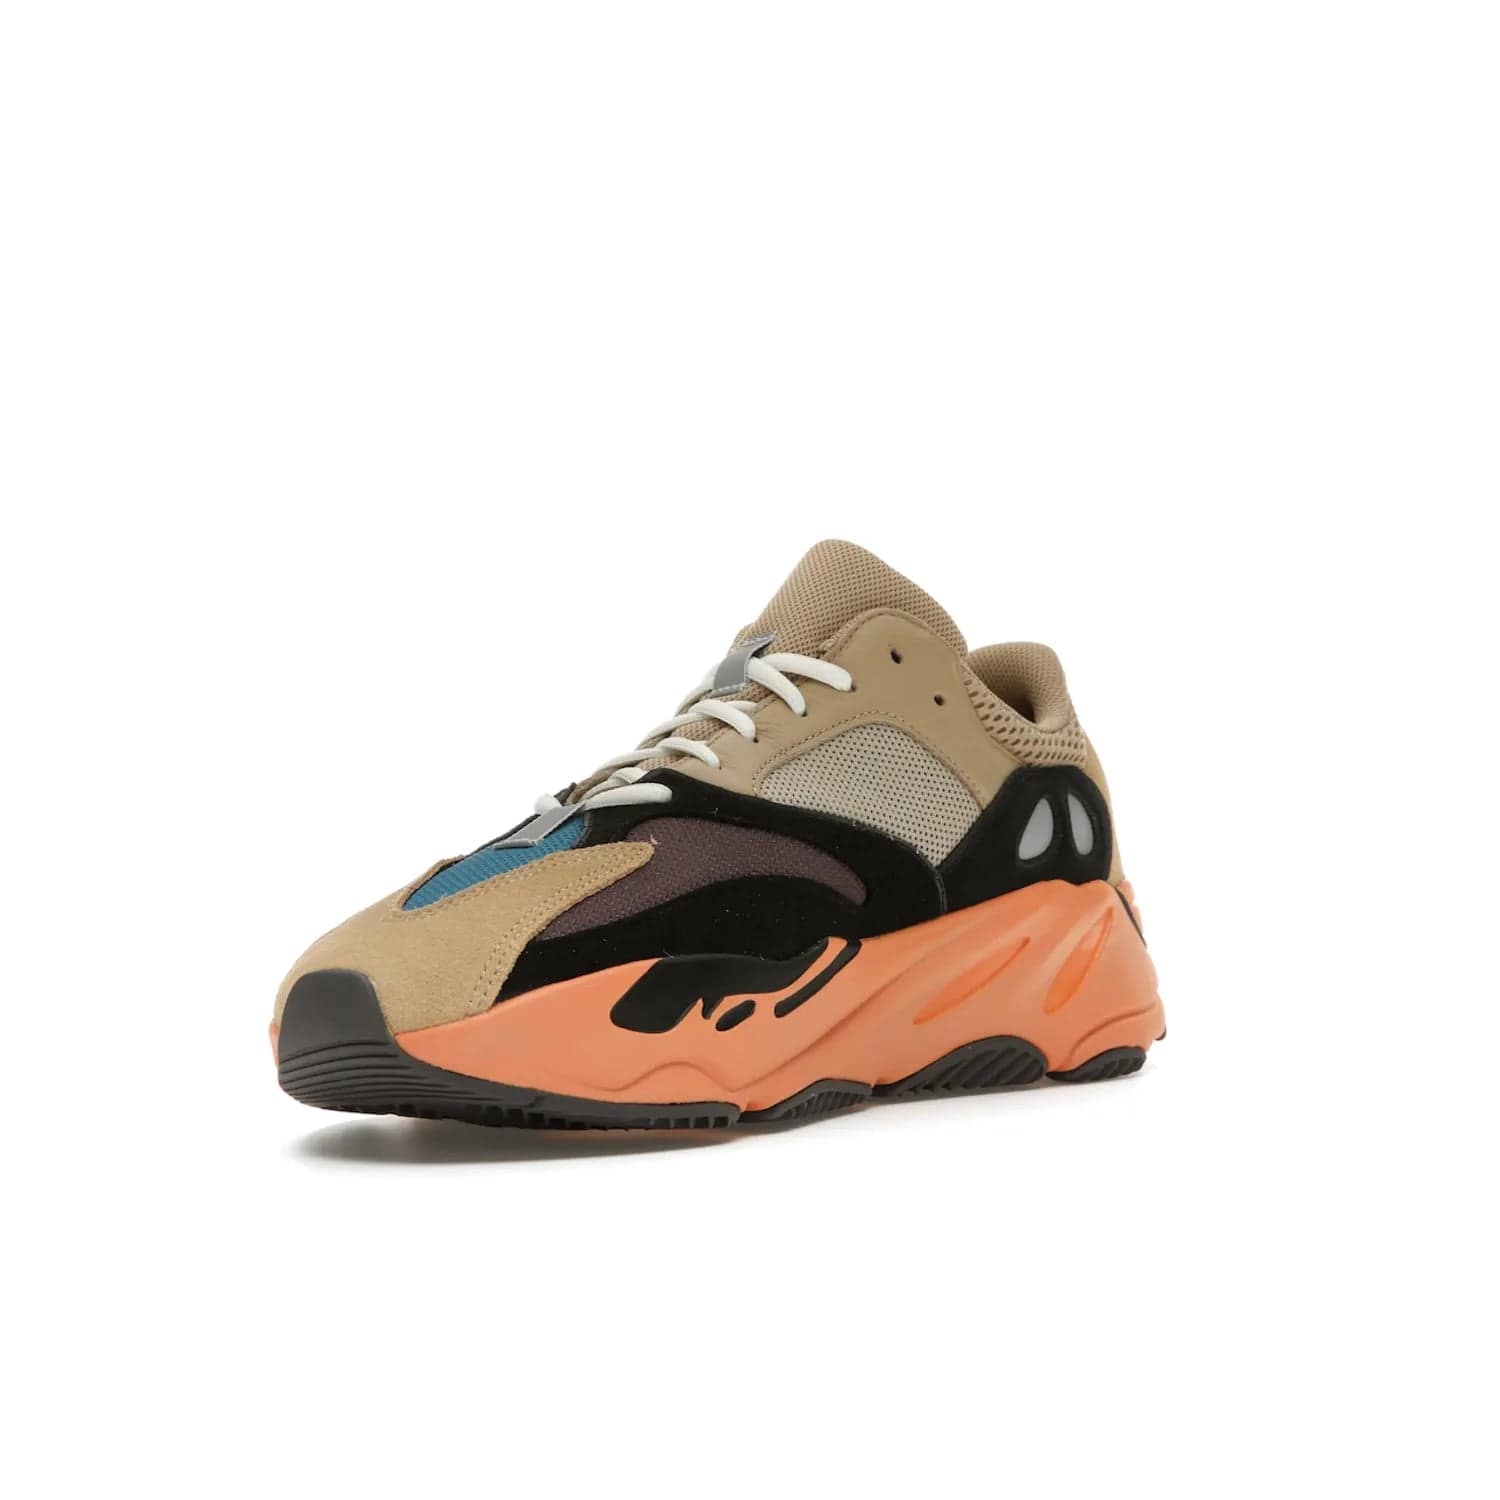 adidas Yeezy Boost 700 Enflame Amber - Image 14 - Only at www.BallersClubKickz.com - Adidas Yeezy Boost 700 Enflame Amber: Eye-catching design with pale yellow, brown, teal, and orange! Get yours in June 2021.